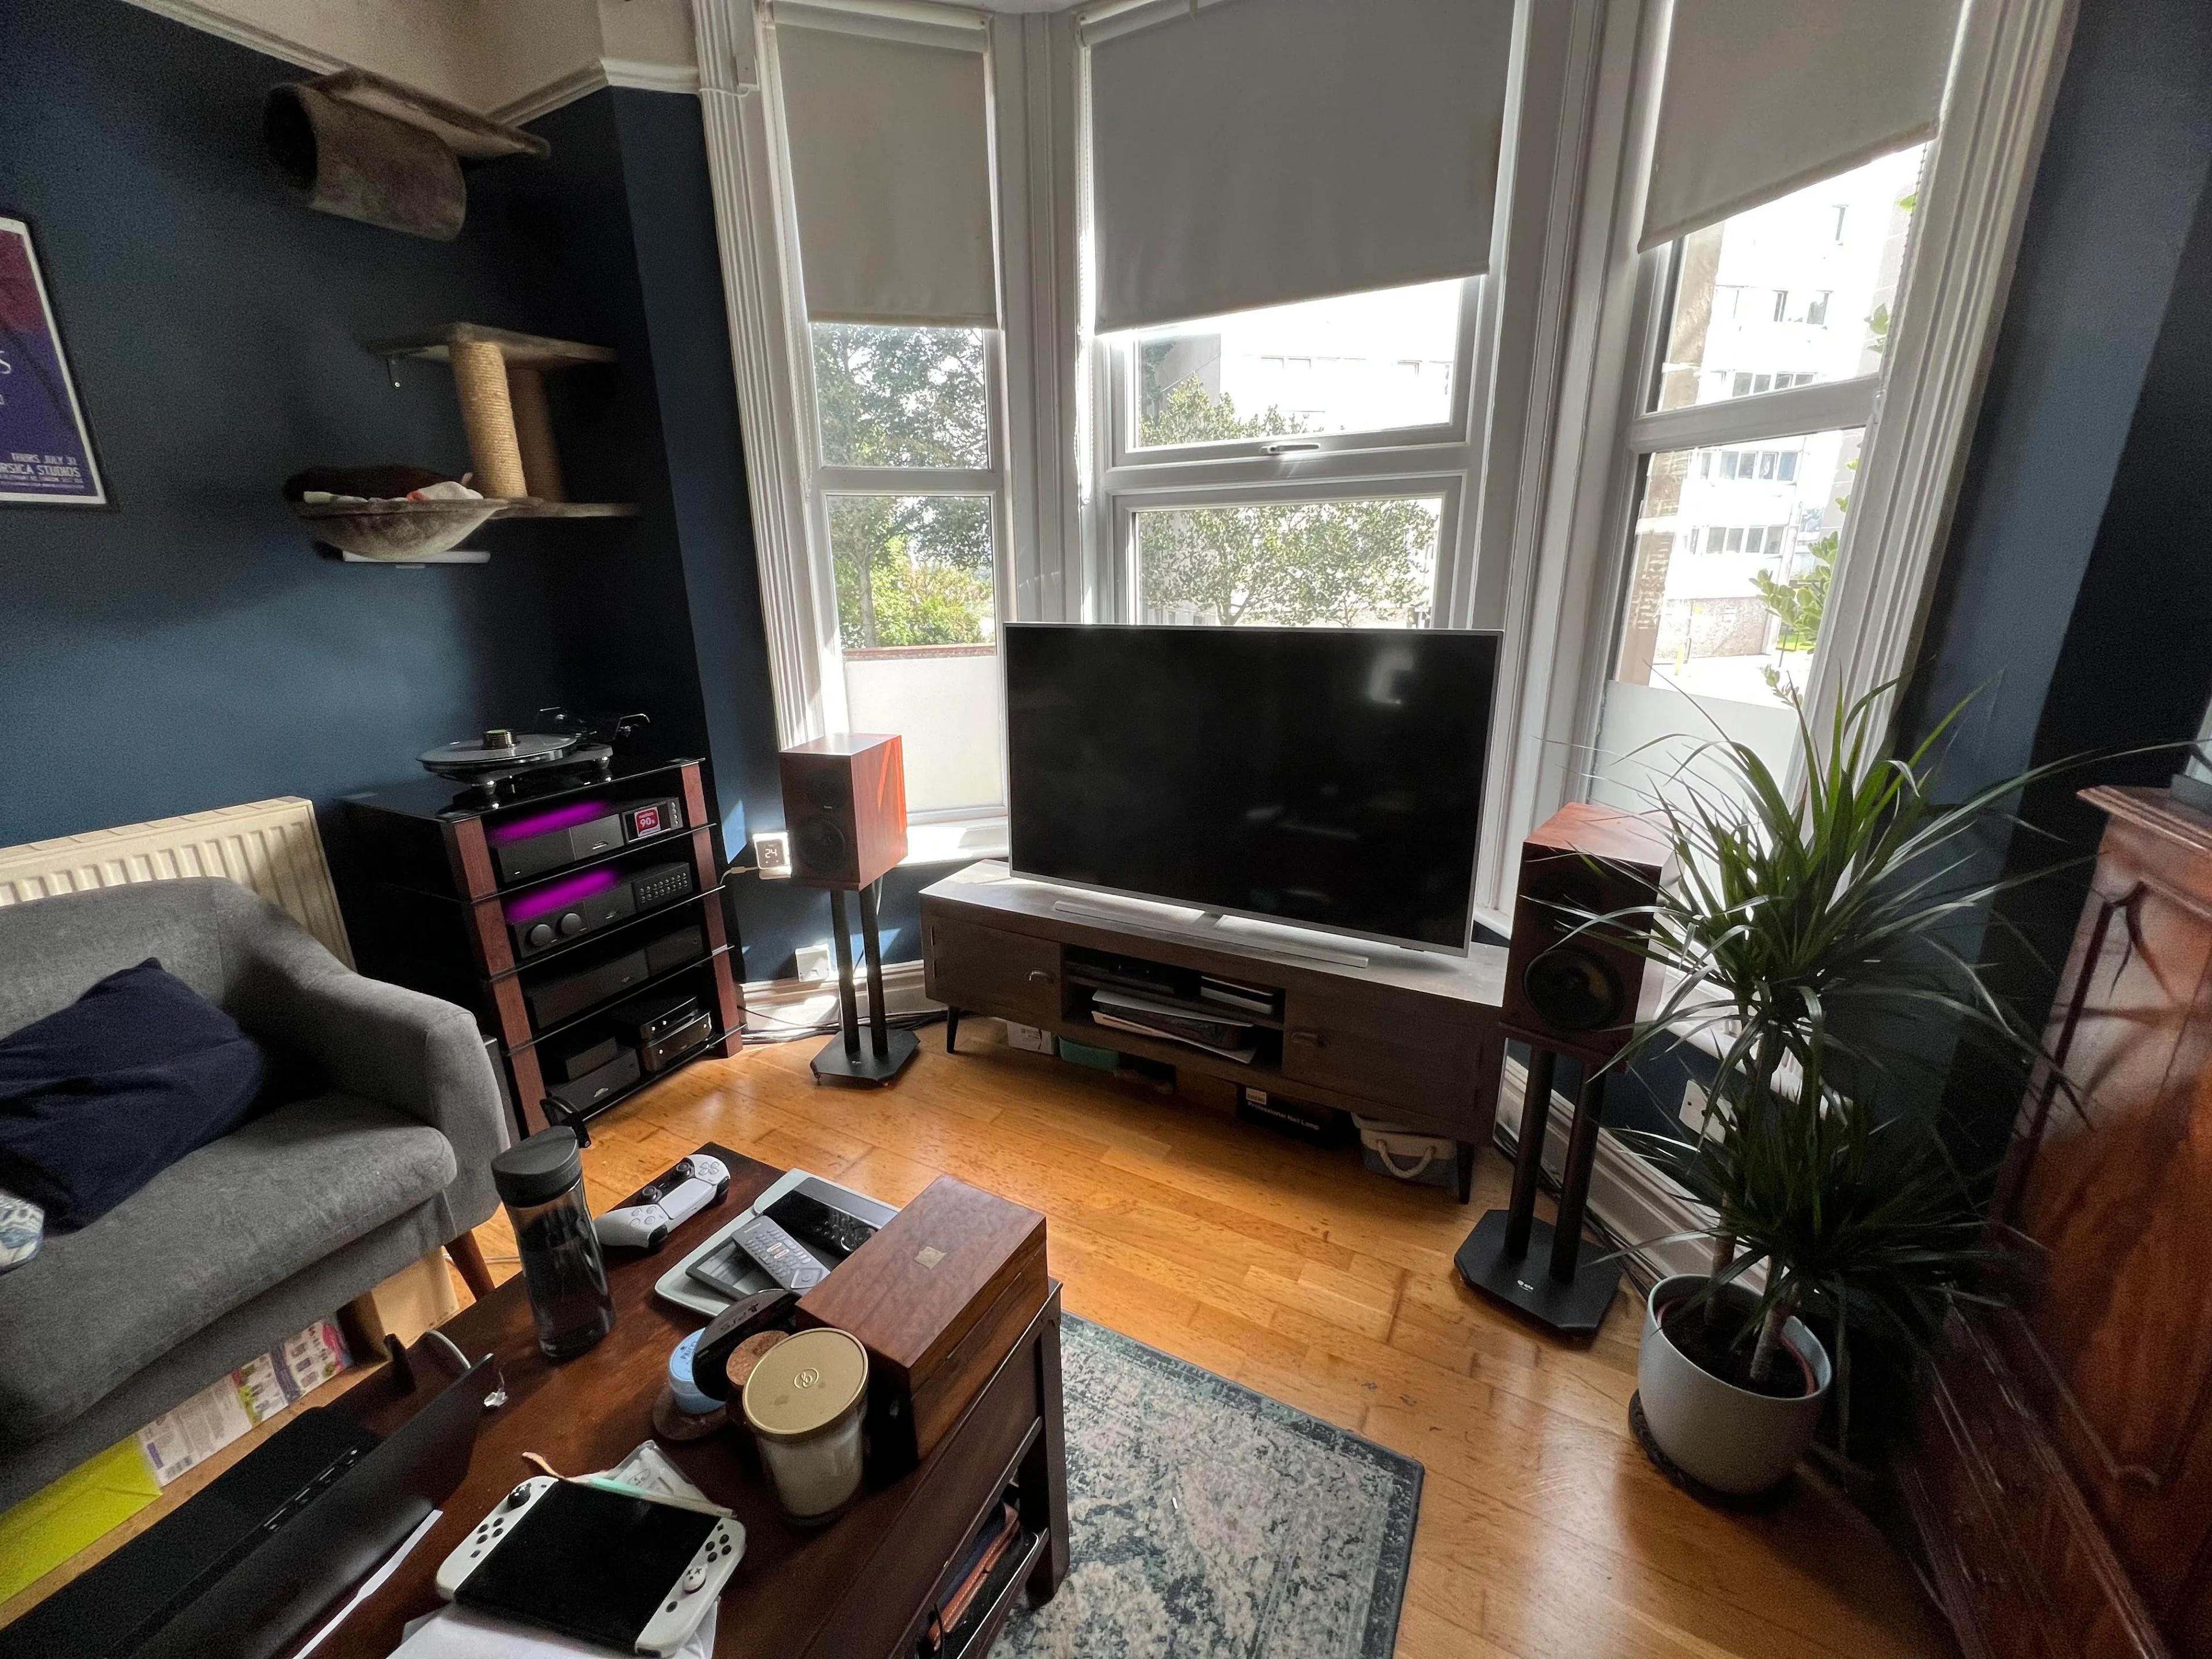 Naim Audio Setup in a Homely Living Room